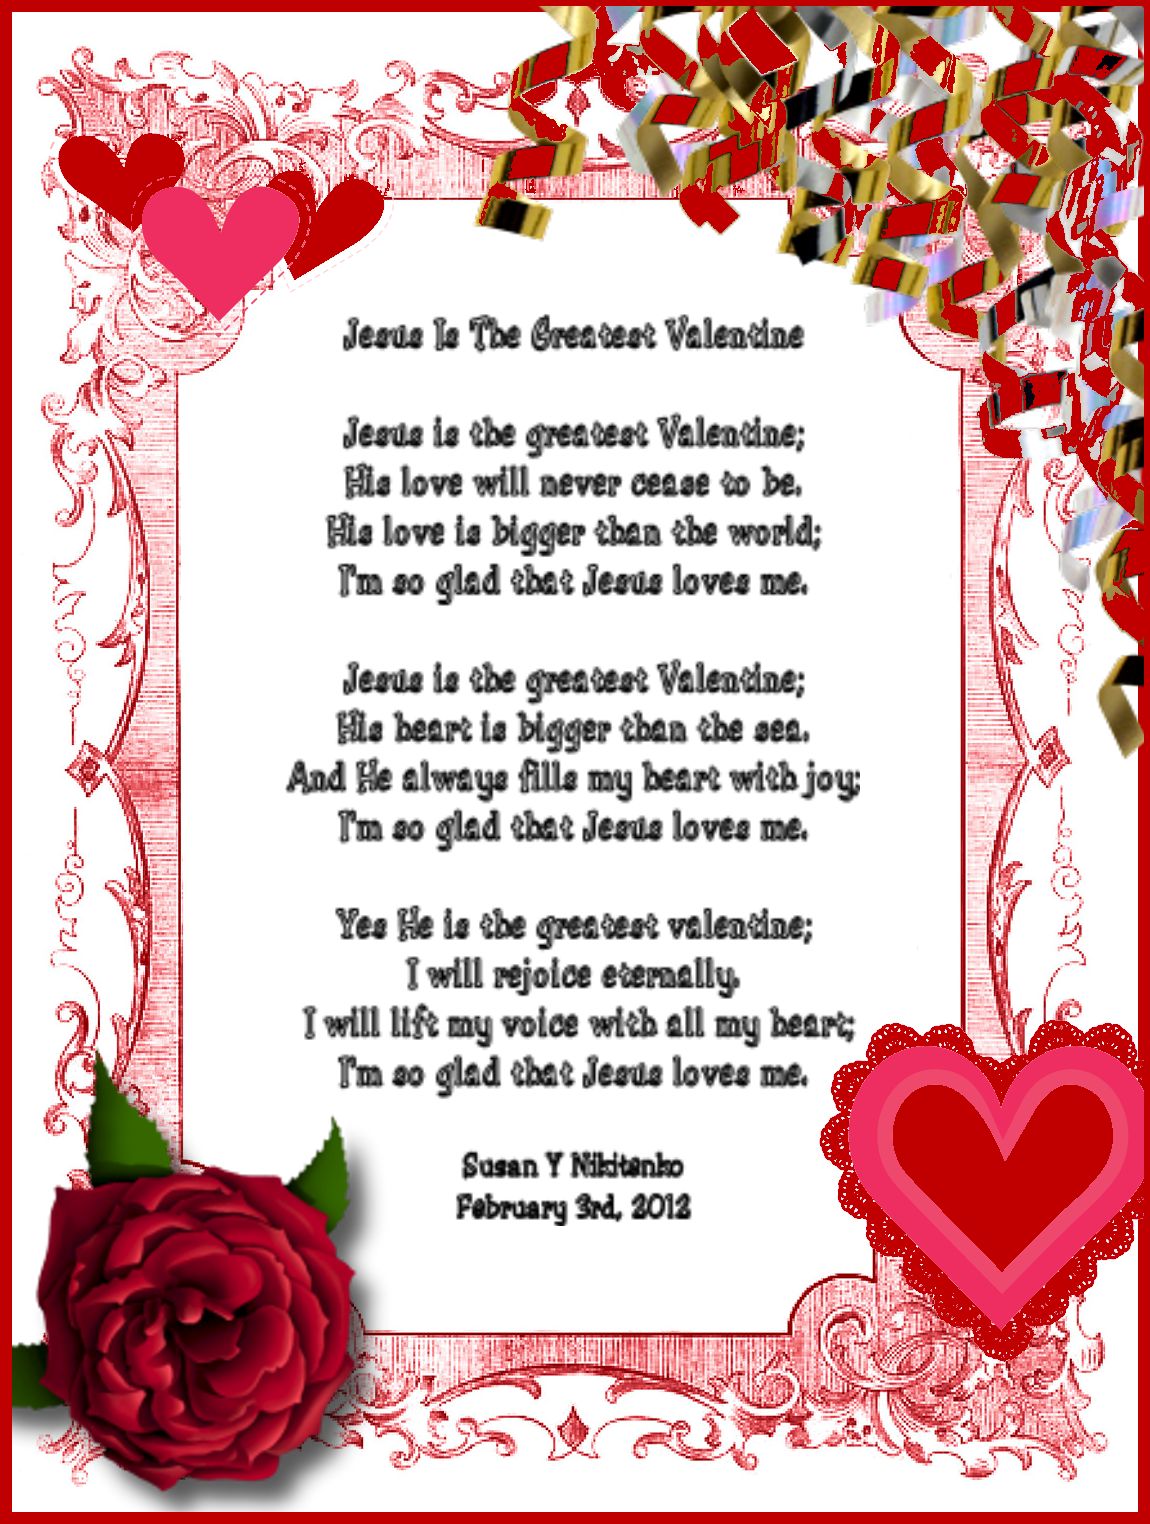 Christian Images In My Treasure Box: Jesus IsThe Greatest Valentine - Poem Poster1150 x 1524